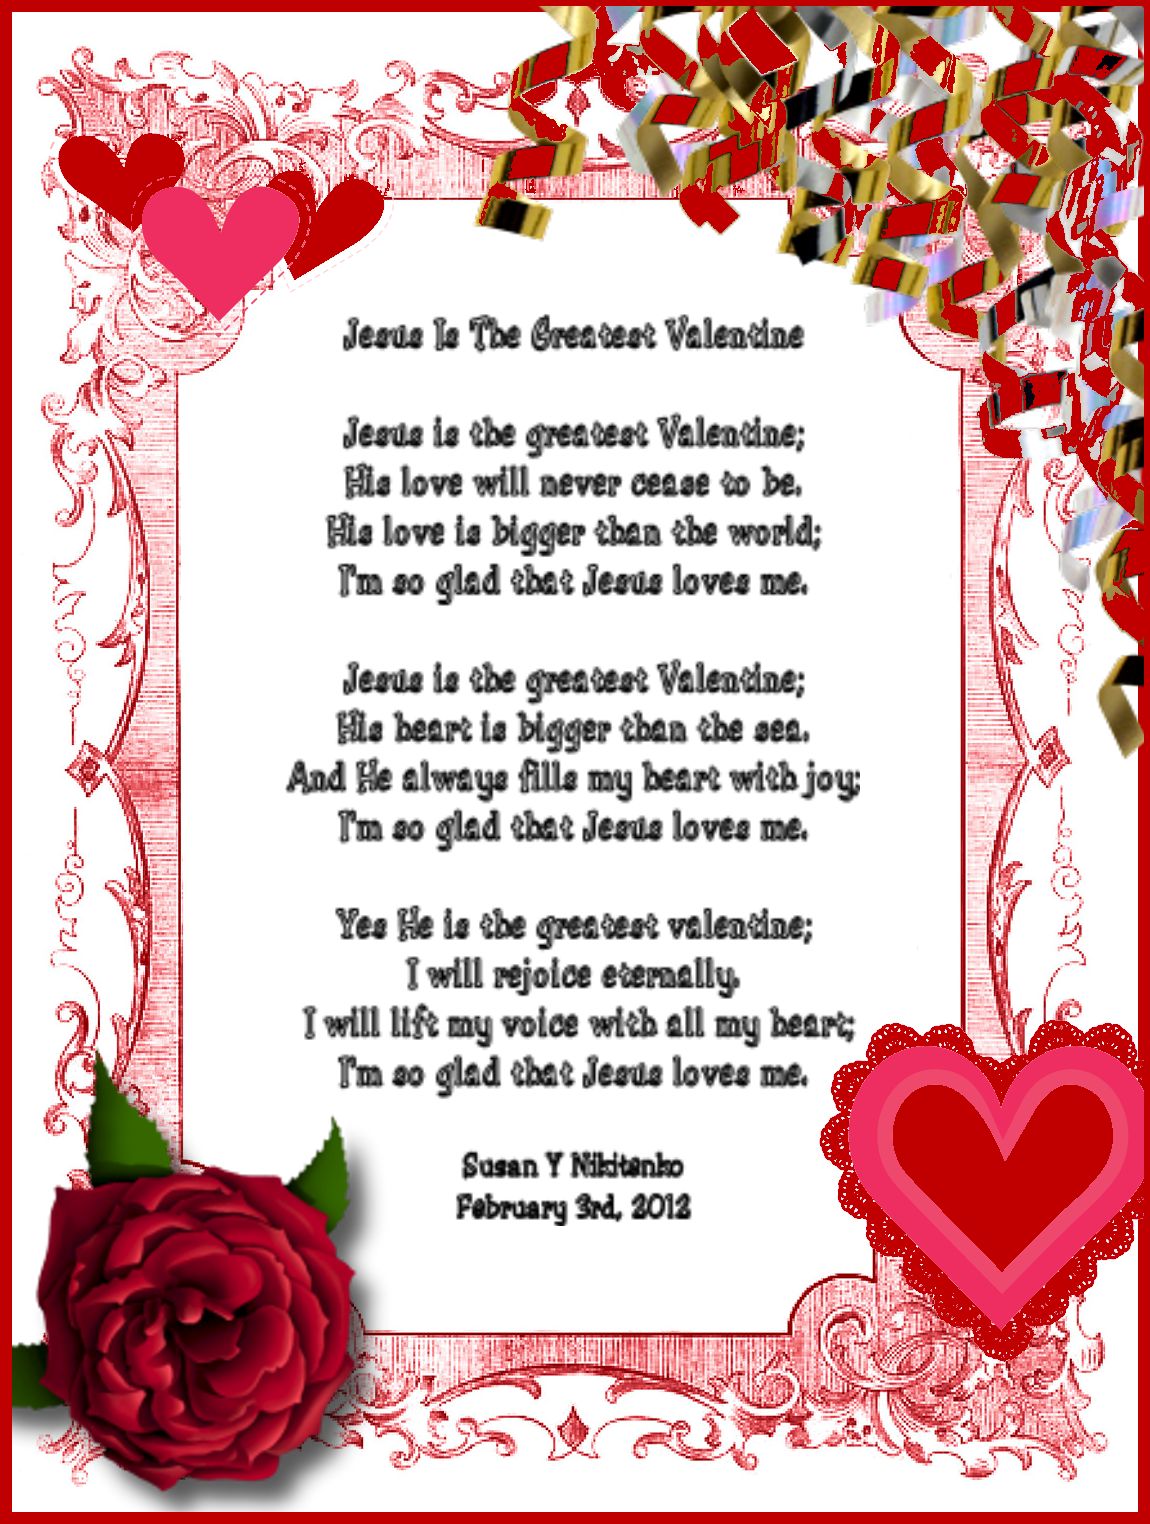 Christian Images In My Treasure Box: Jesus IsThe Greatest Valentine - Poem Poster1150 x 1524